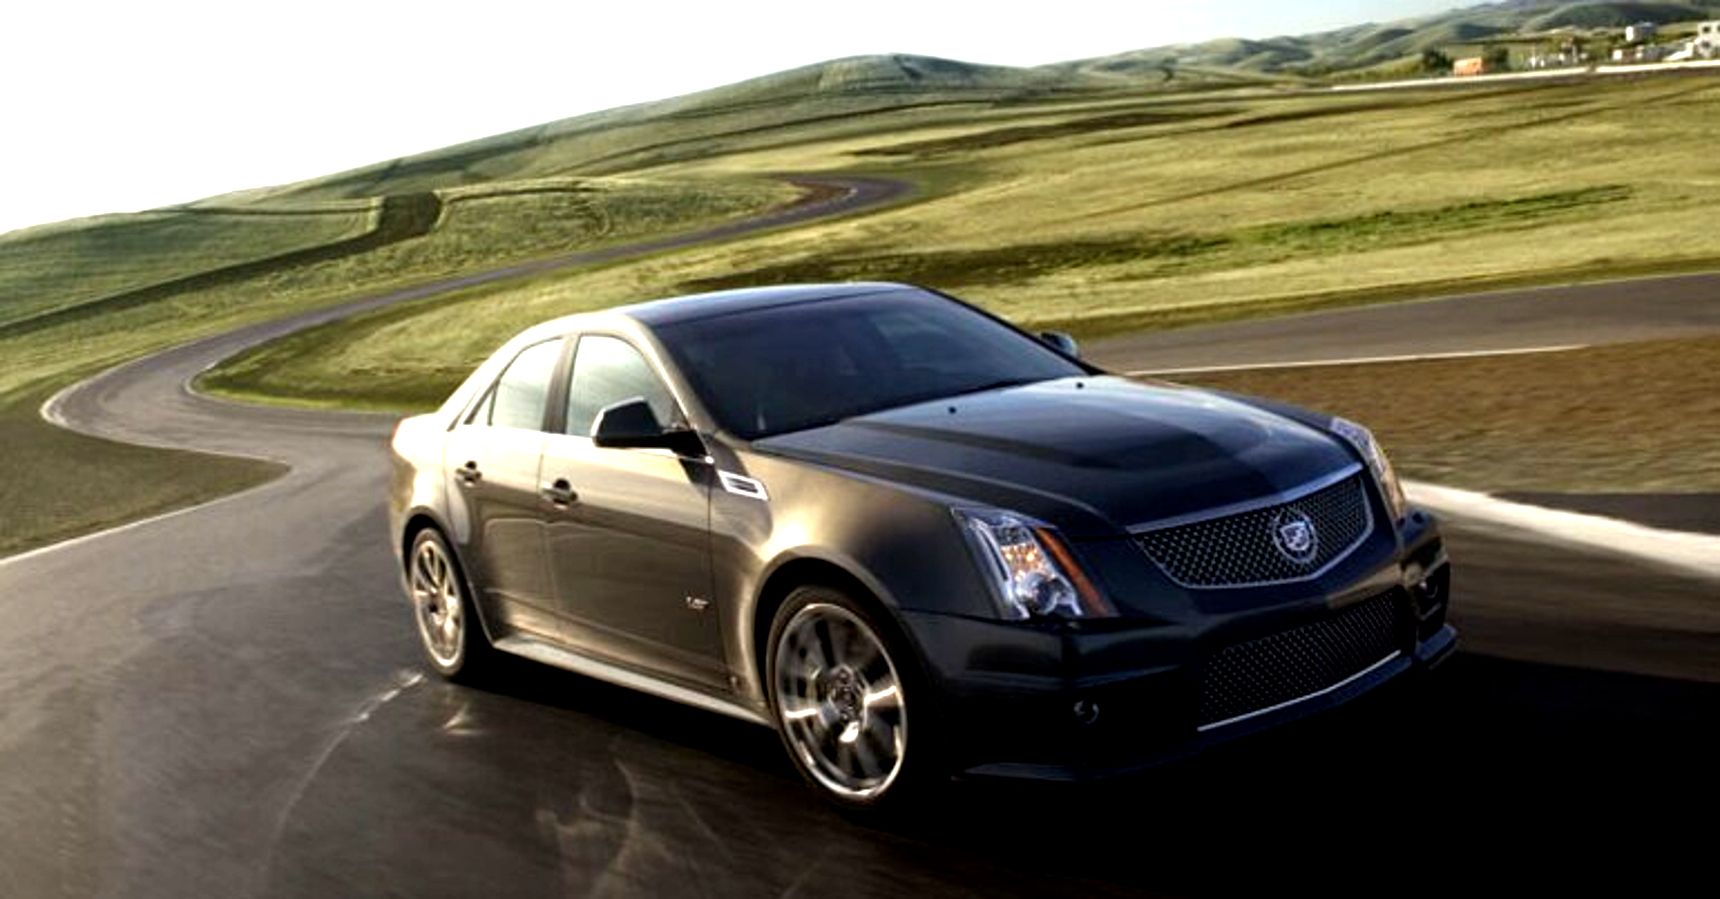 The 2010 Cadillac CTS-V is one of the most popular Caddy cars.